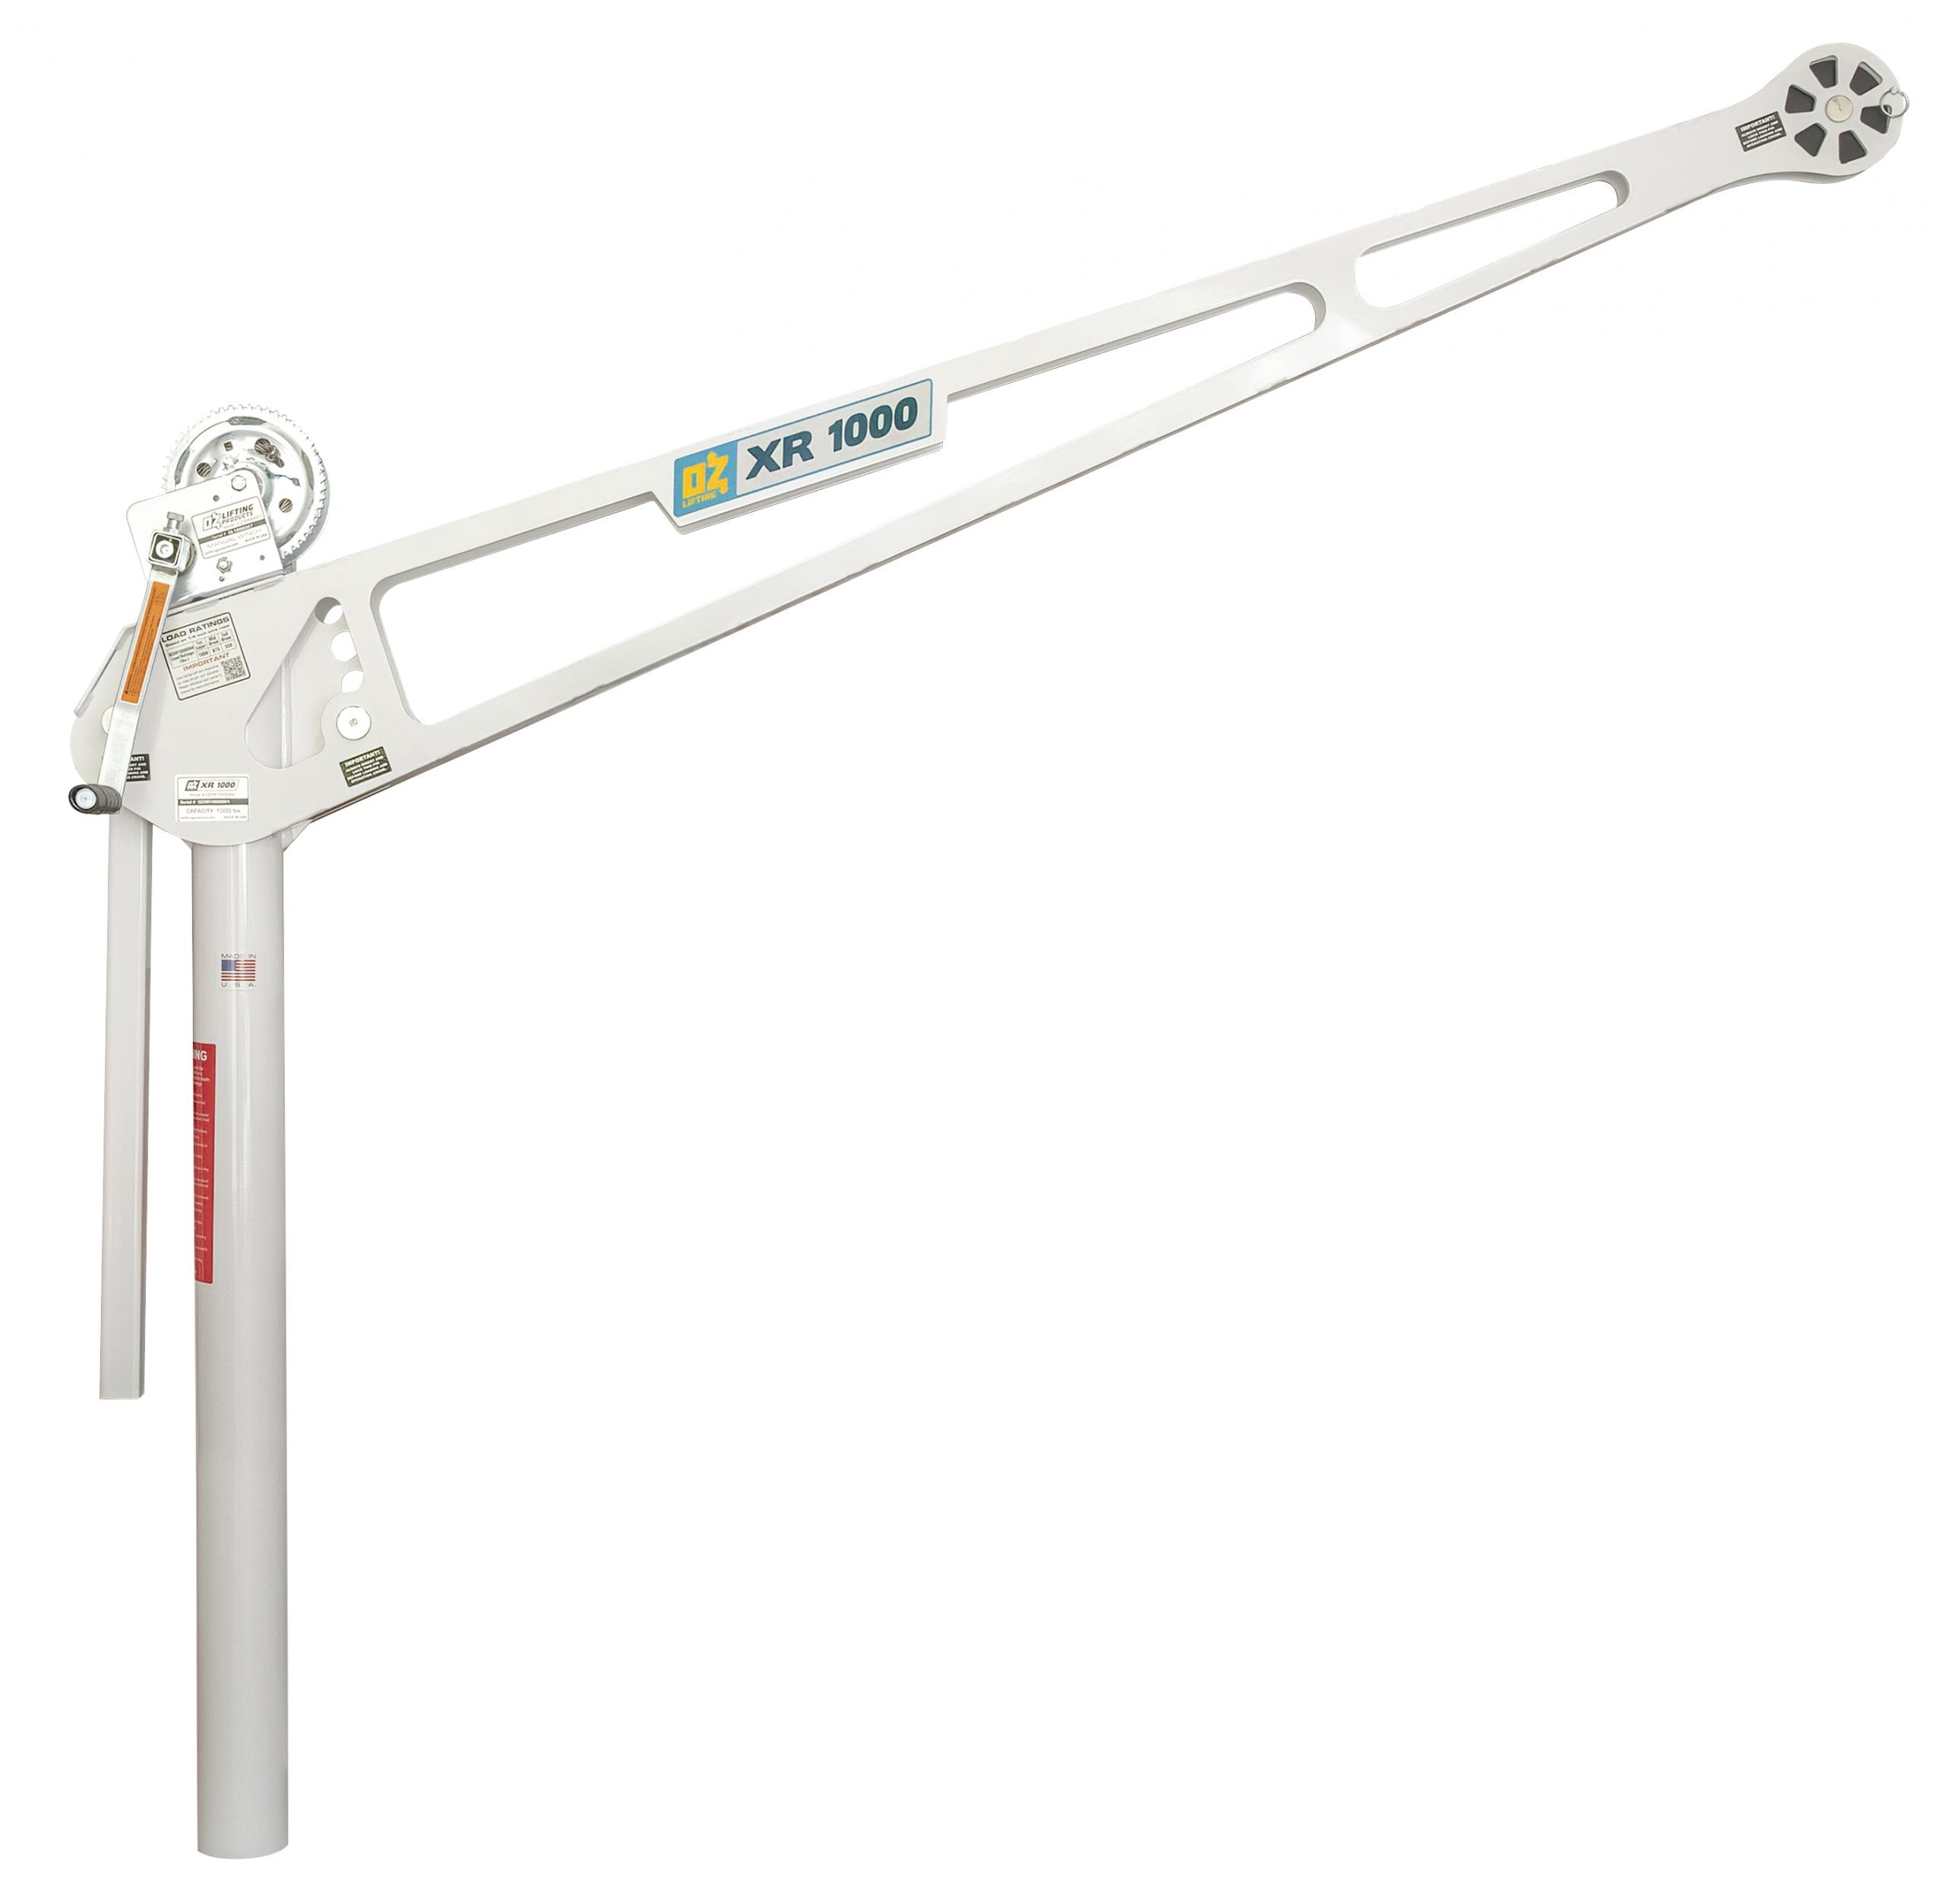 OZ Lifting XR Series Davit Crane with Manual Winch for Lifting Dinghies